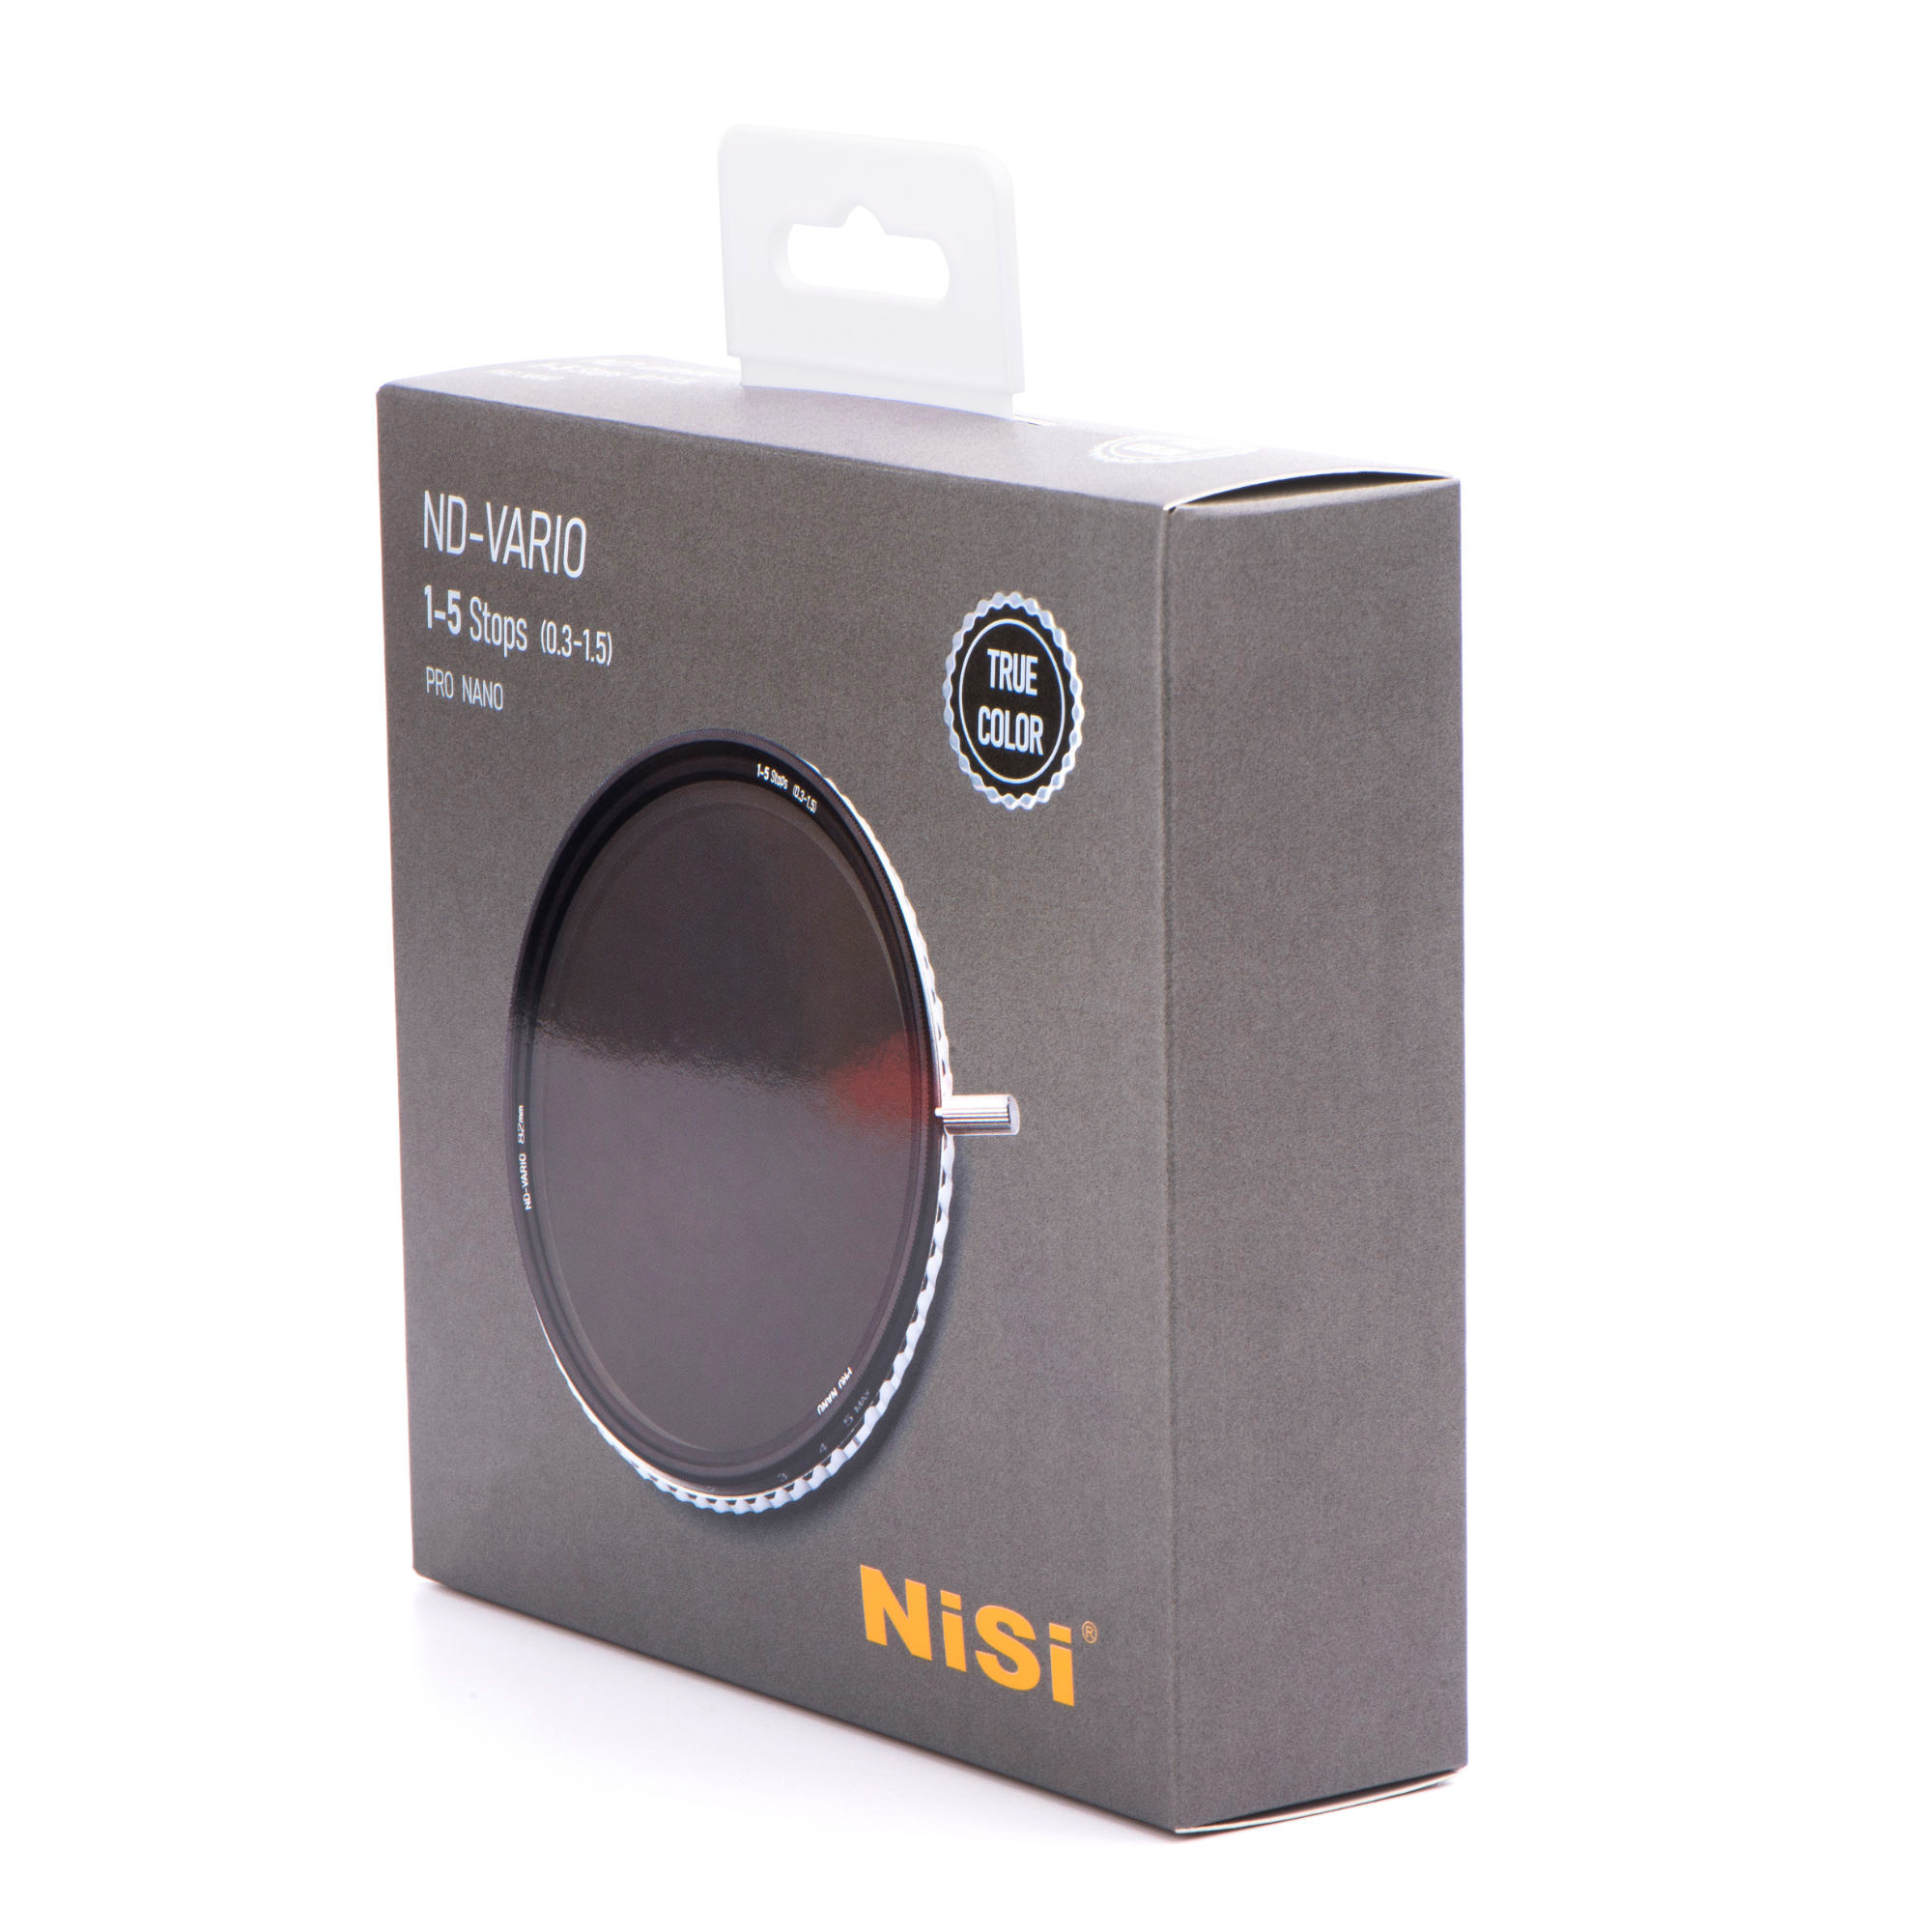 NiSi 82mm Swift True Color ND-VARIO Pro Nano 1-5stops Variable ND 